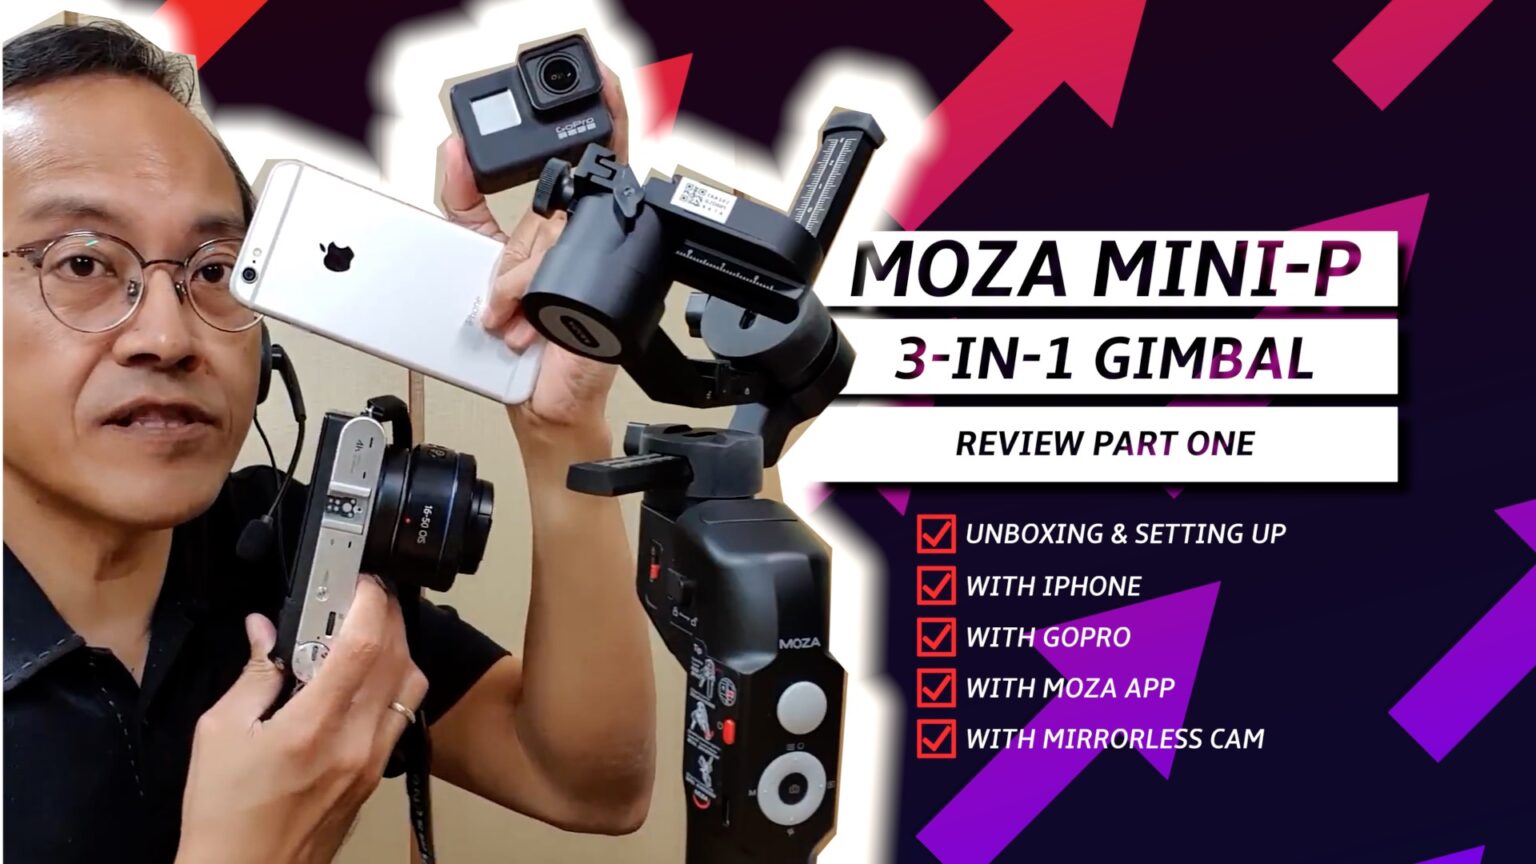 3-in-1 Gimbal for Phone, Camera, and GoPro – MOZA Mini-P Review #1